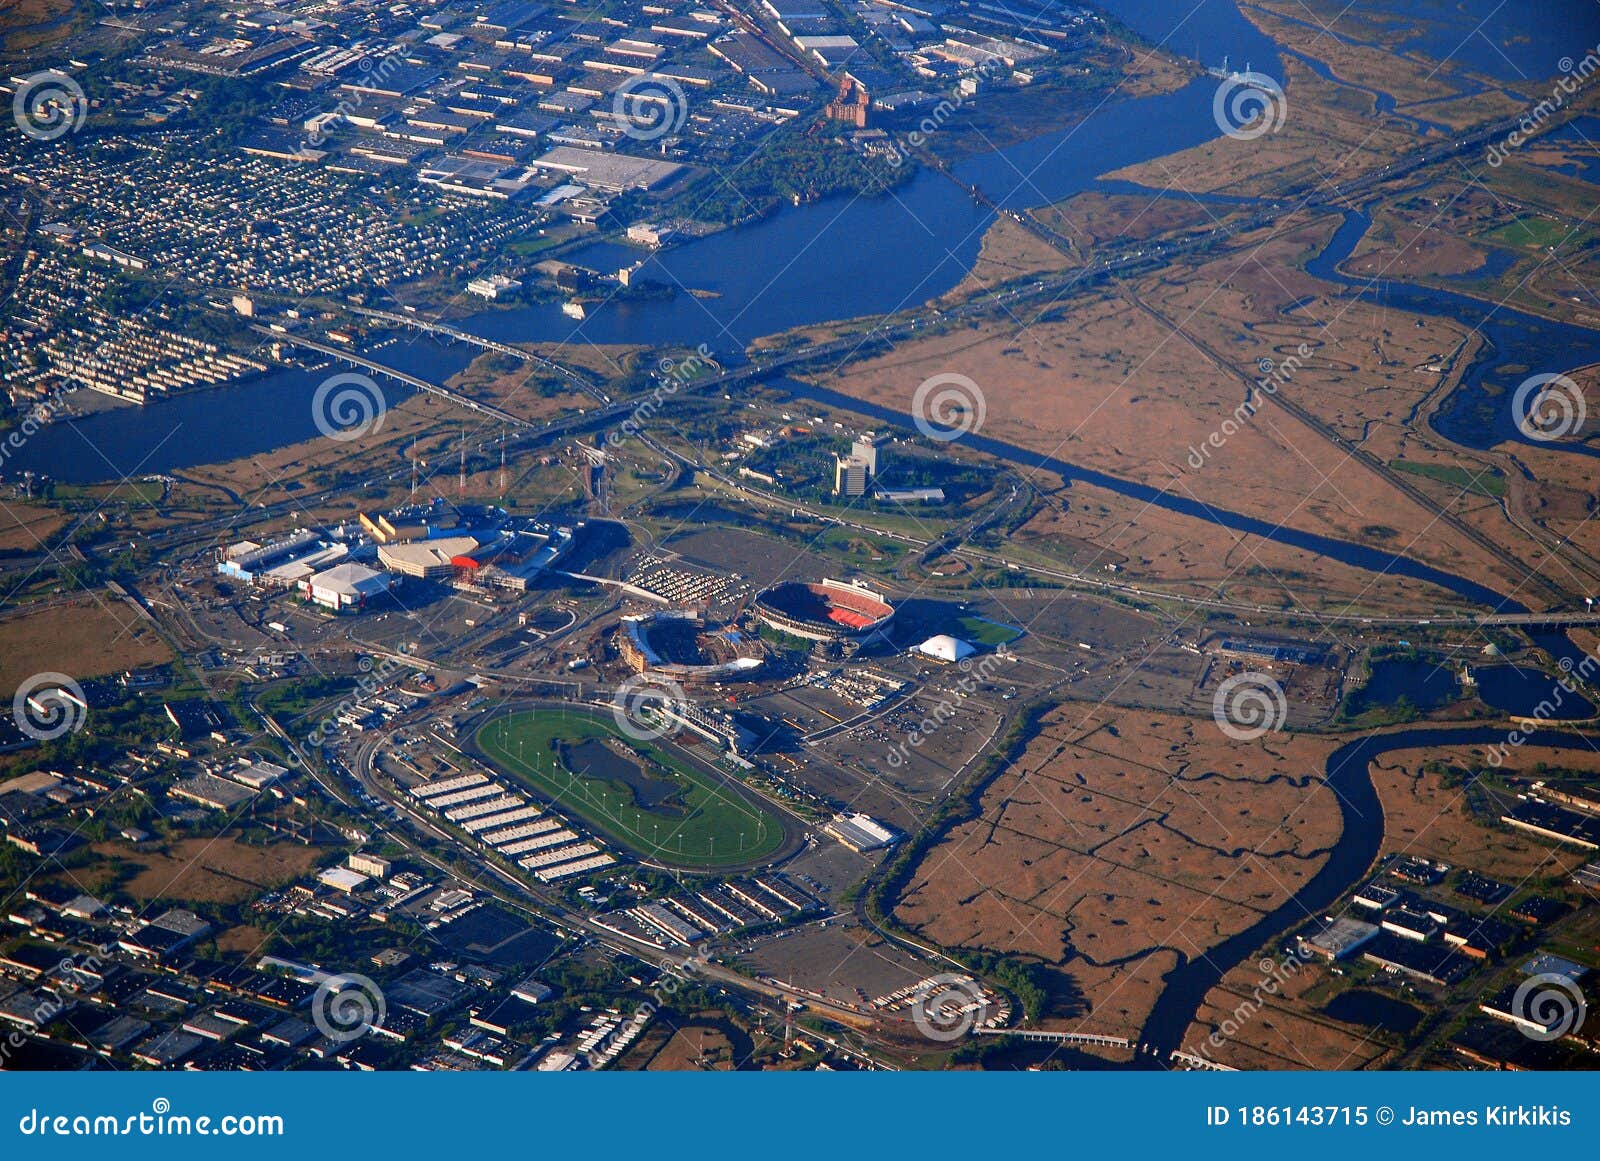 37 Meadowlands Sports Complex Images, Stock Photos, 3D objects